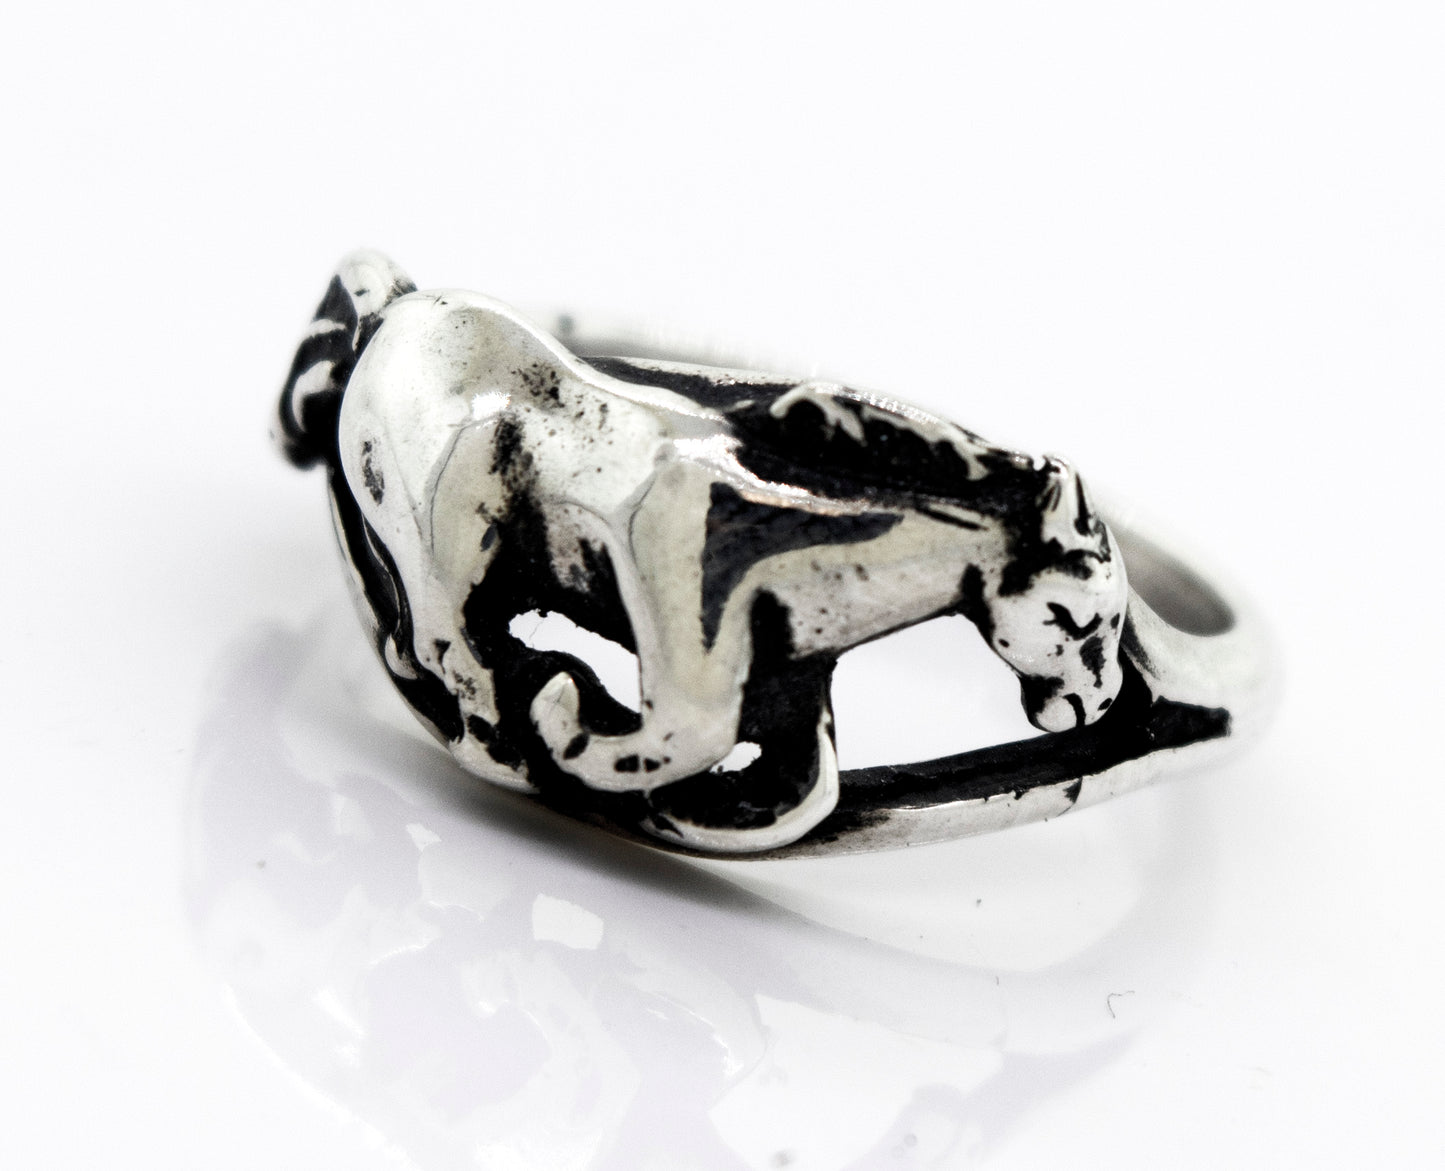 An American Made Horse Ring with a Super Silver branding, designed in oxidized sterling silver.